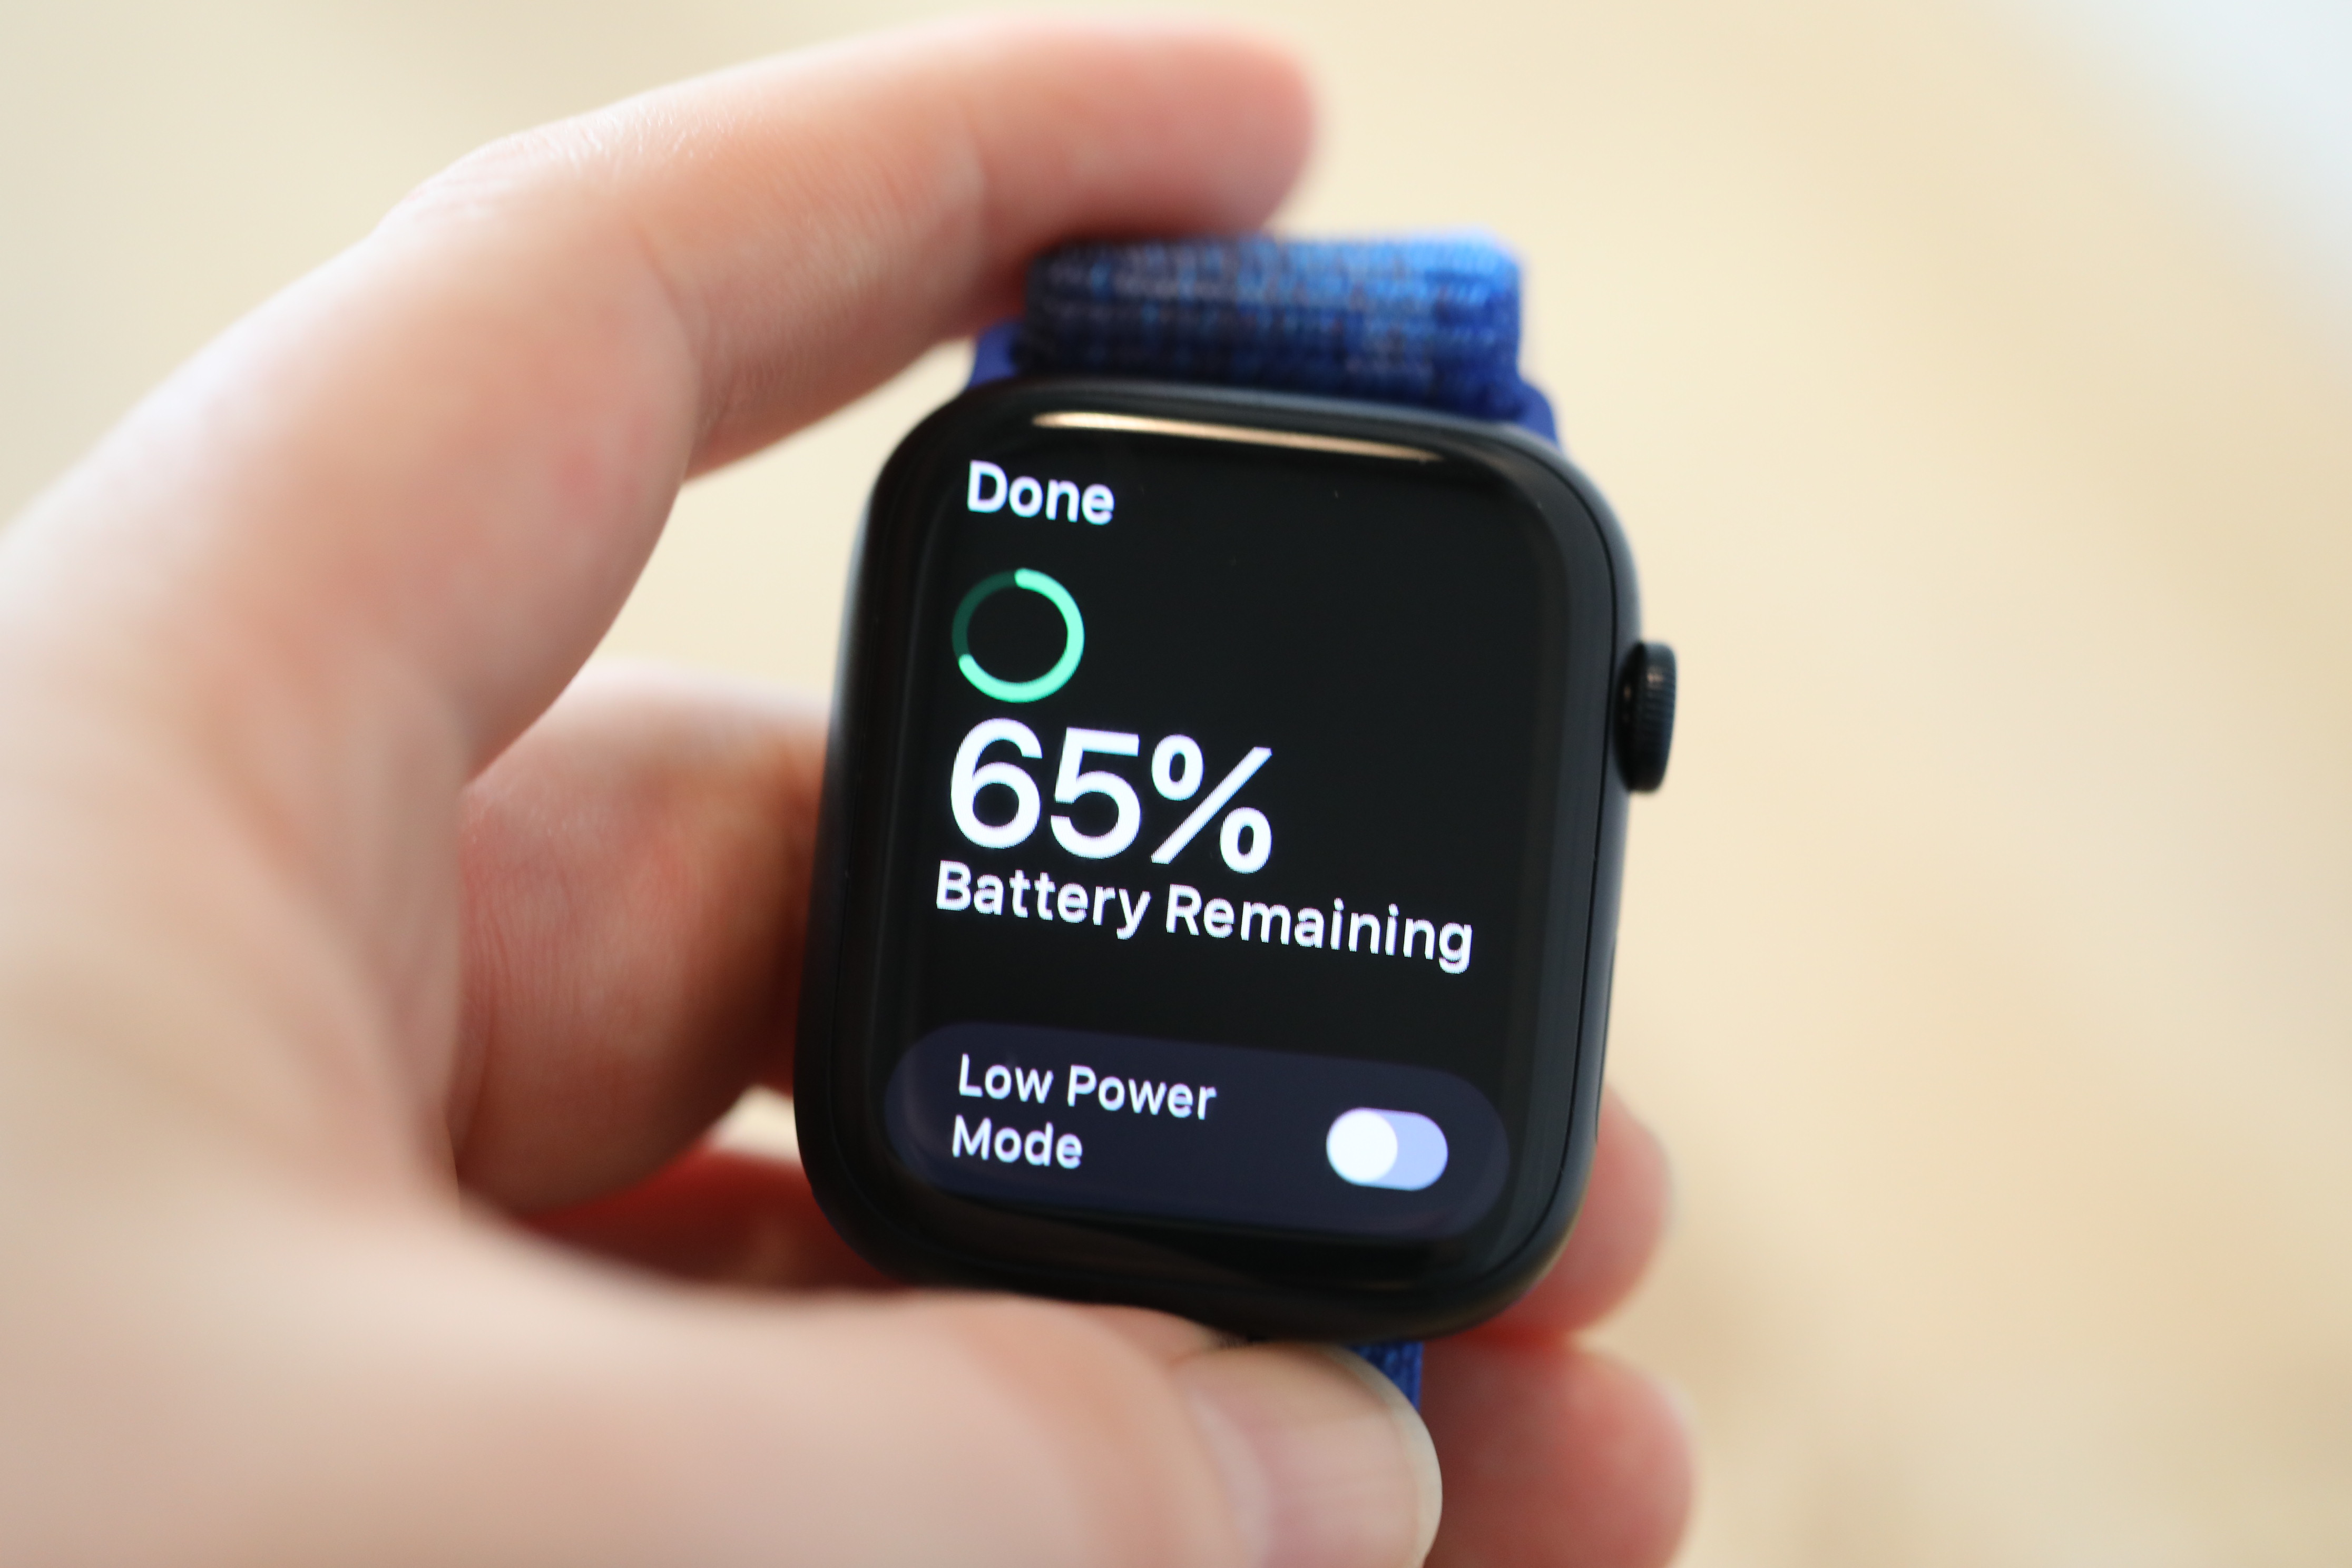 A guide to Low Power Mode on the Apple Watch thumbnail